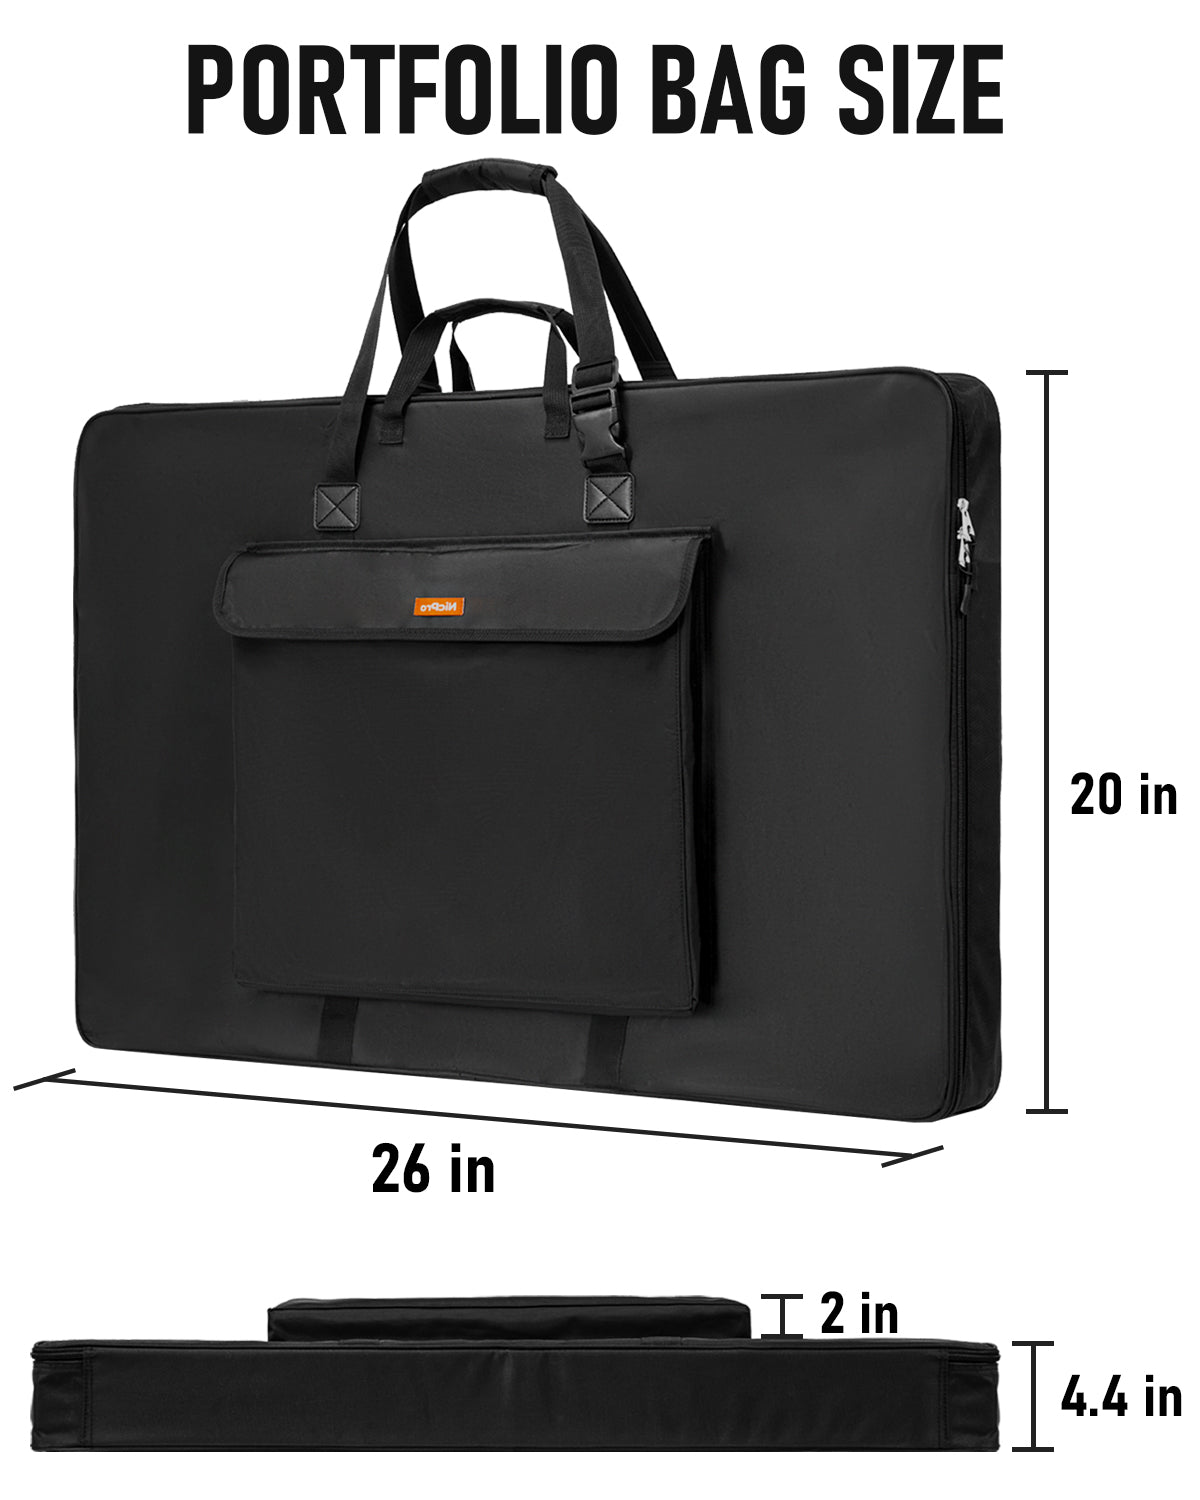 WATERPROOF ART PORTFOLIO Bag 20 X 26 for 18 X 24 Artworks with Outer  Pockets $24.01 - PicClick